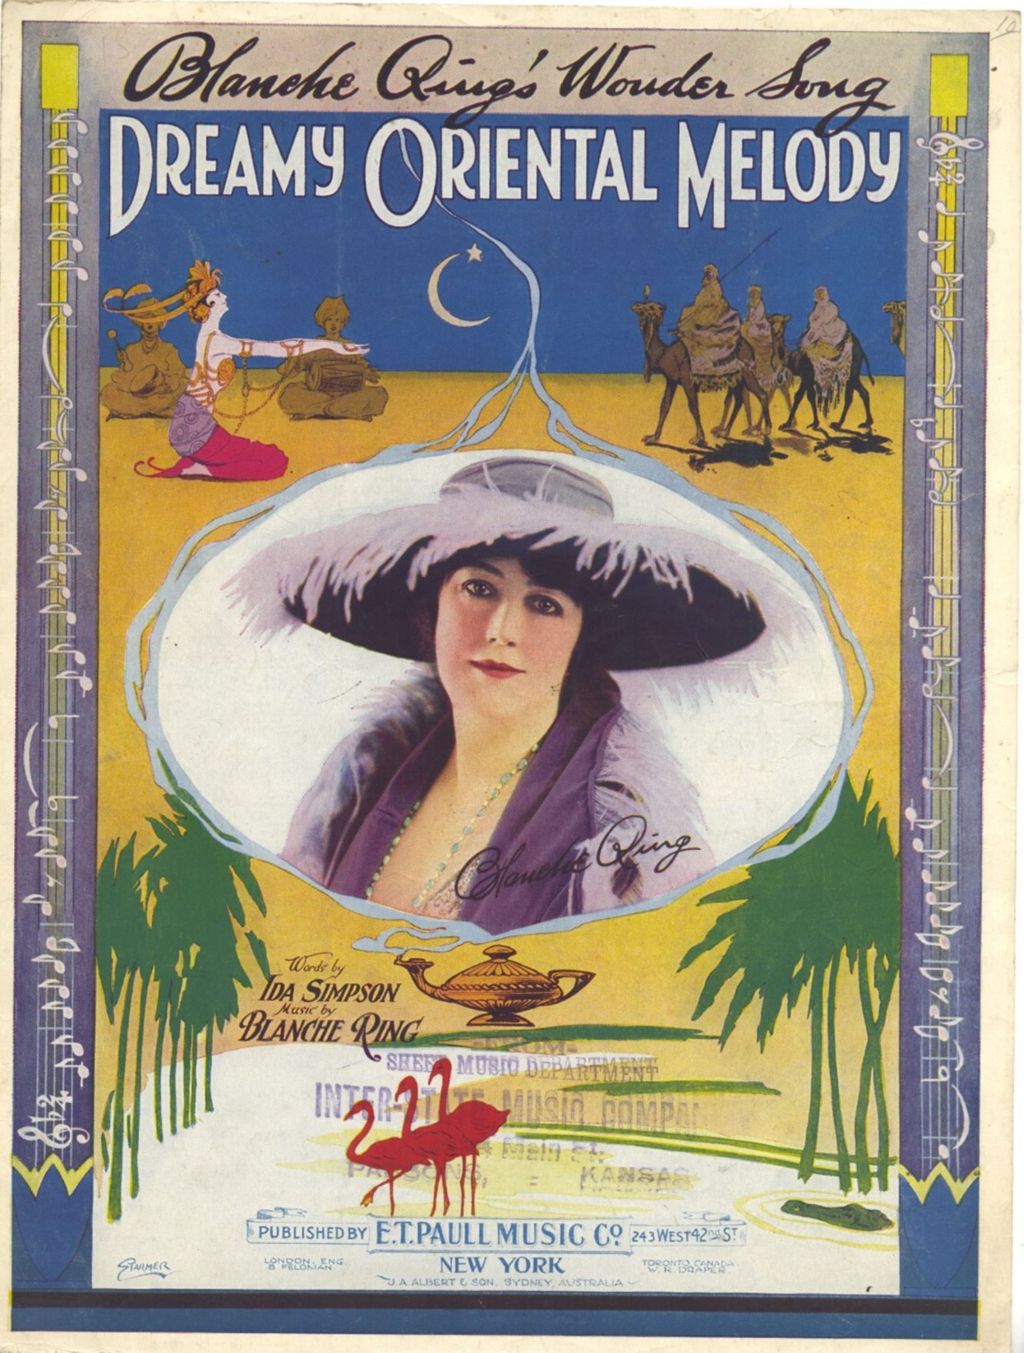 Miniature of Dreamy Oriental Melody (Blanche Ring's Wonder Song)